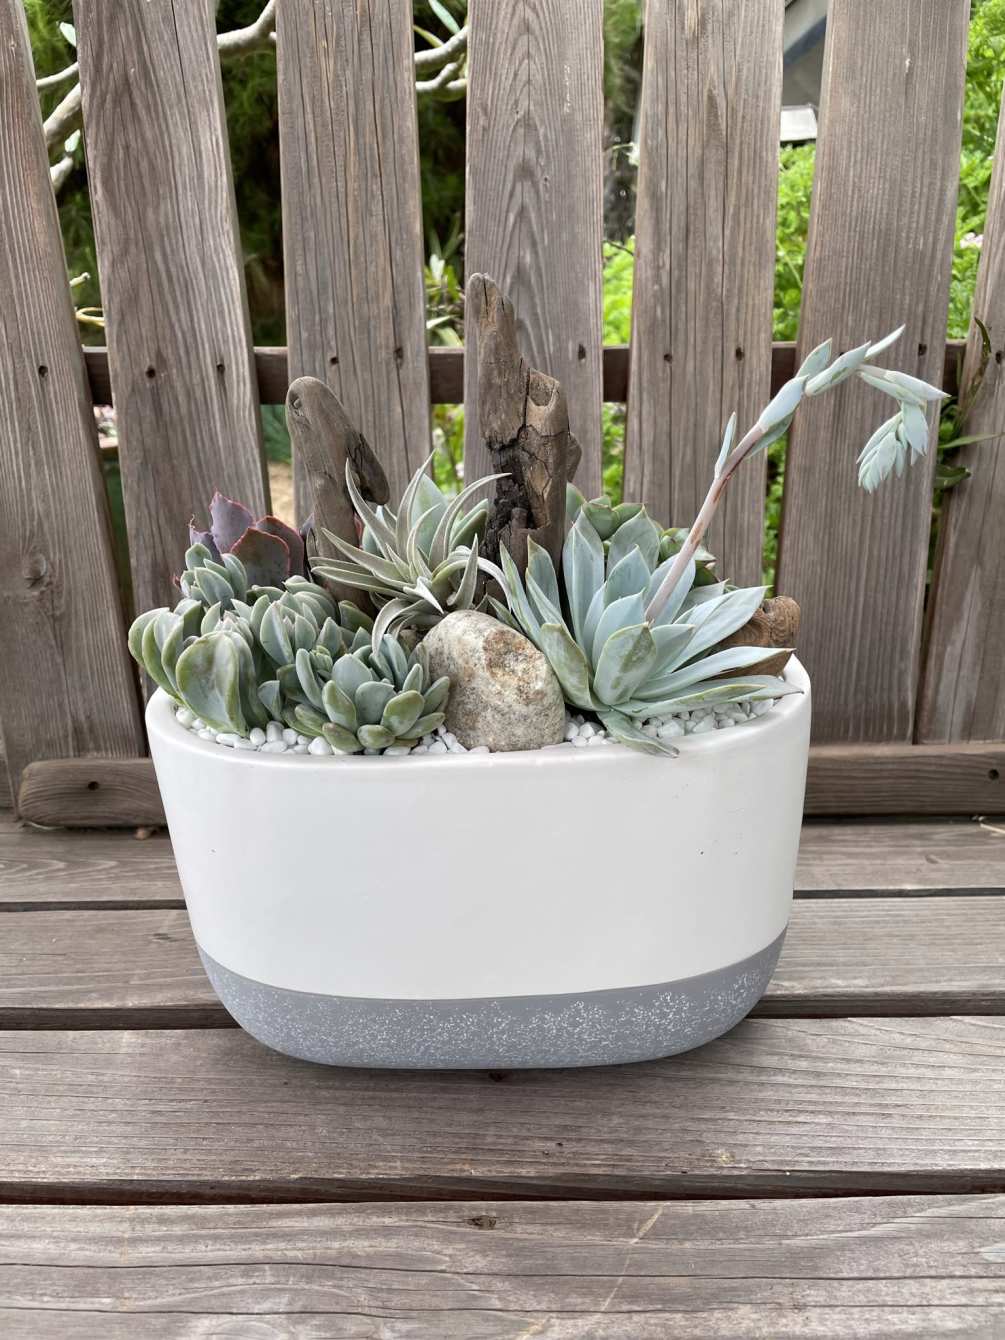 Succulents planted in a modern container with driftwood and an airplane accent.